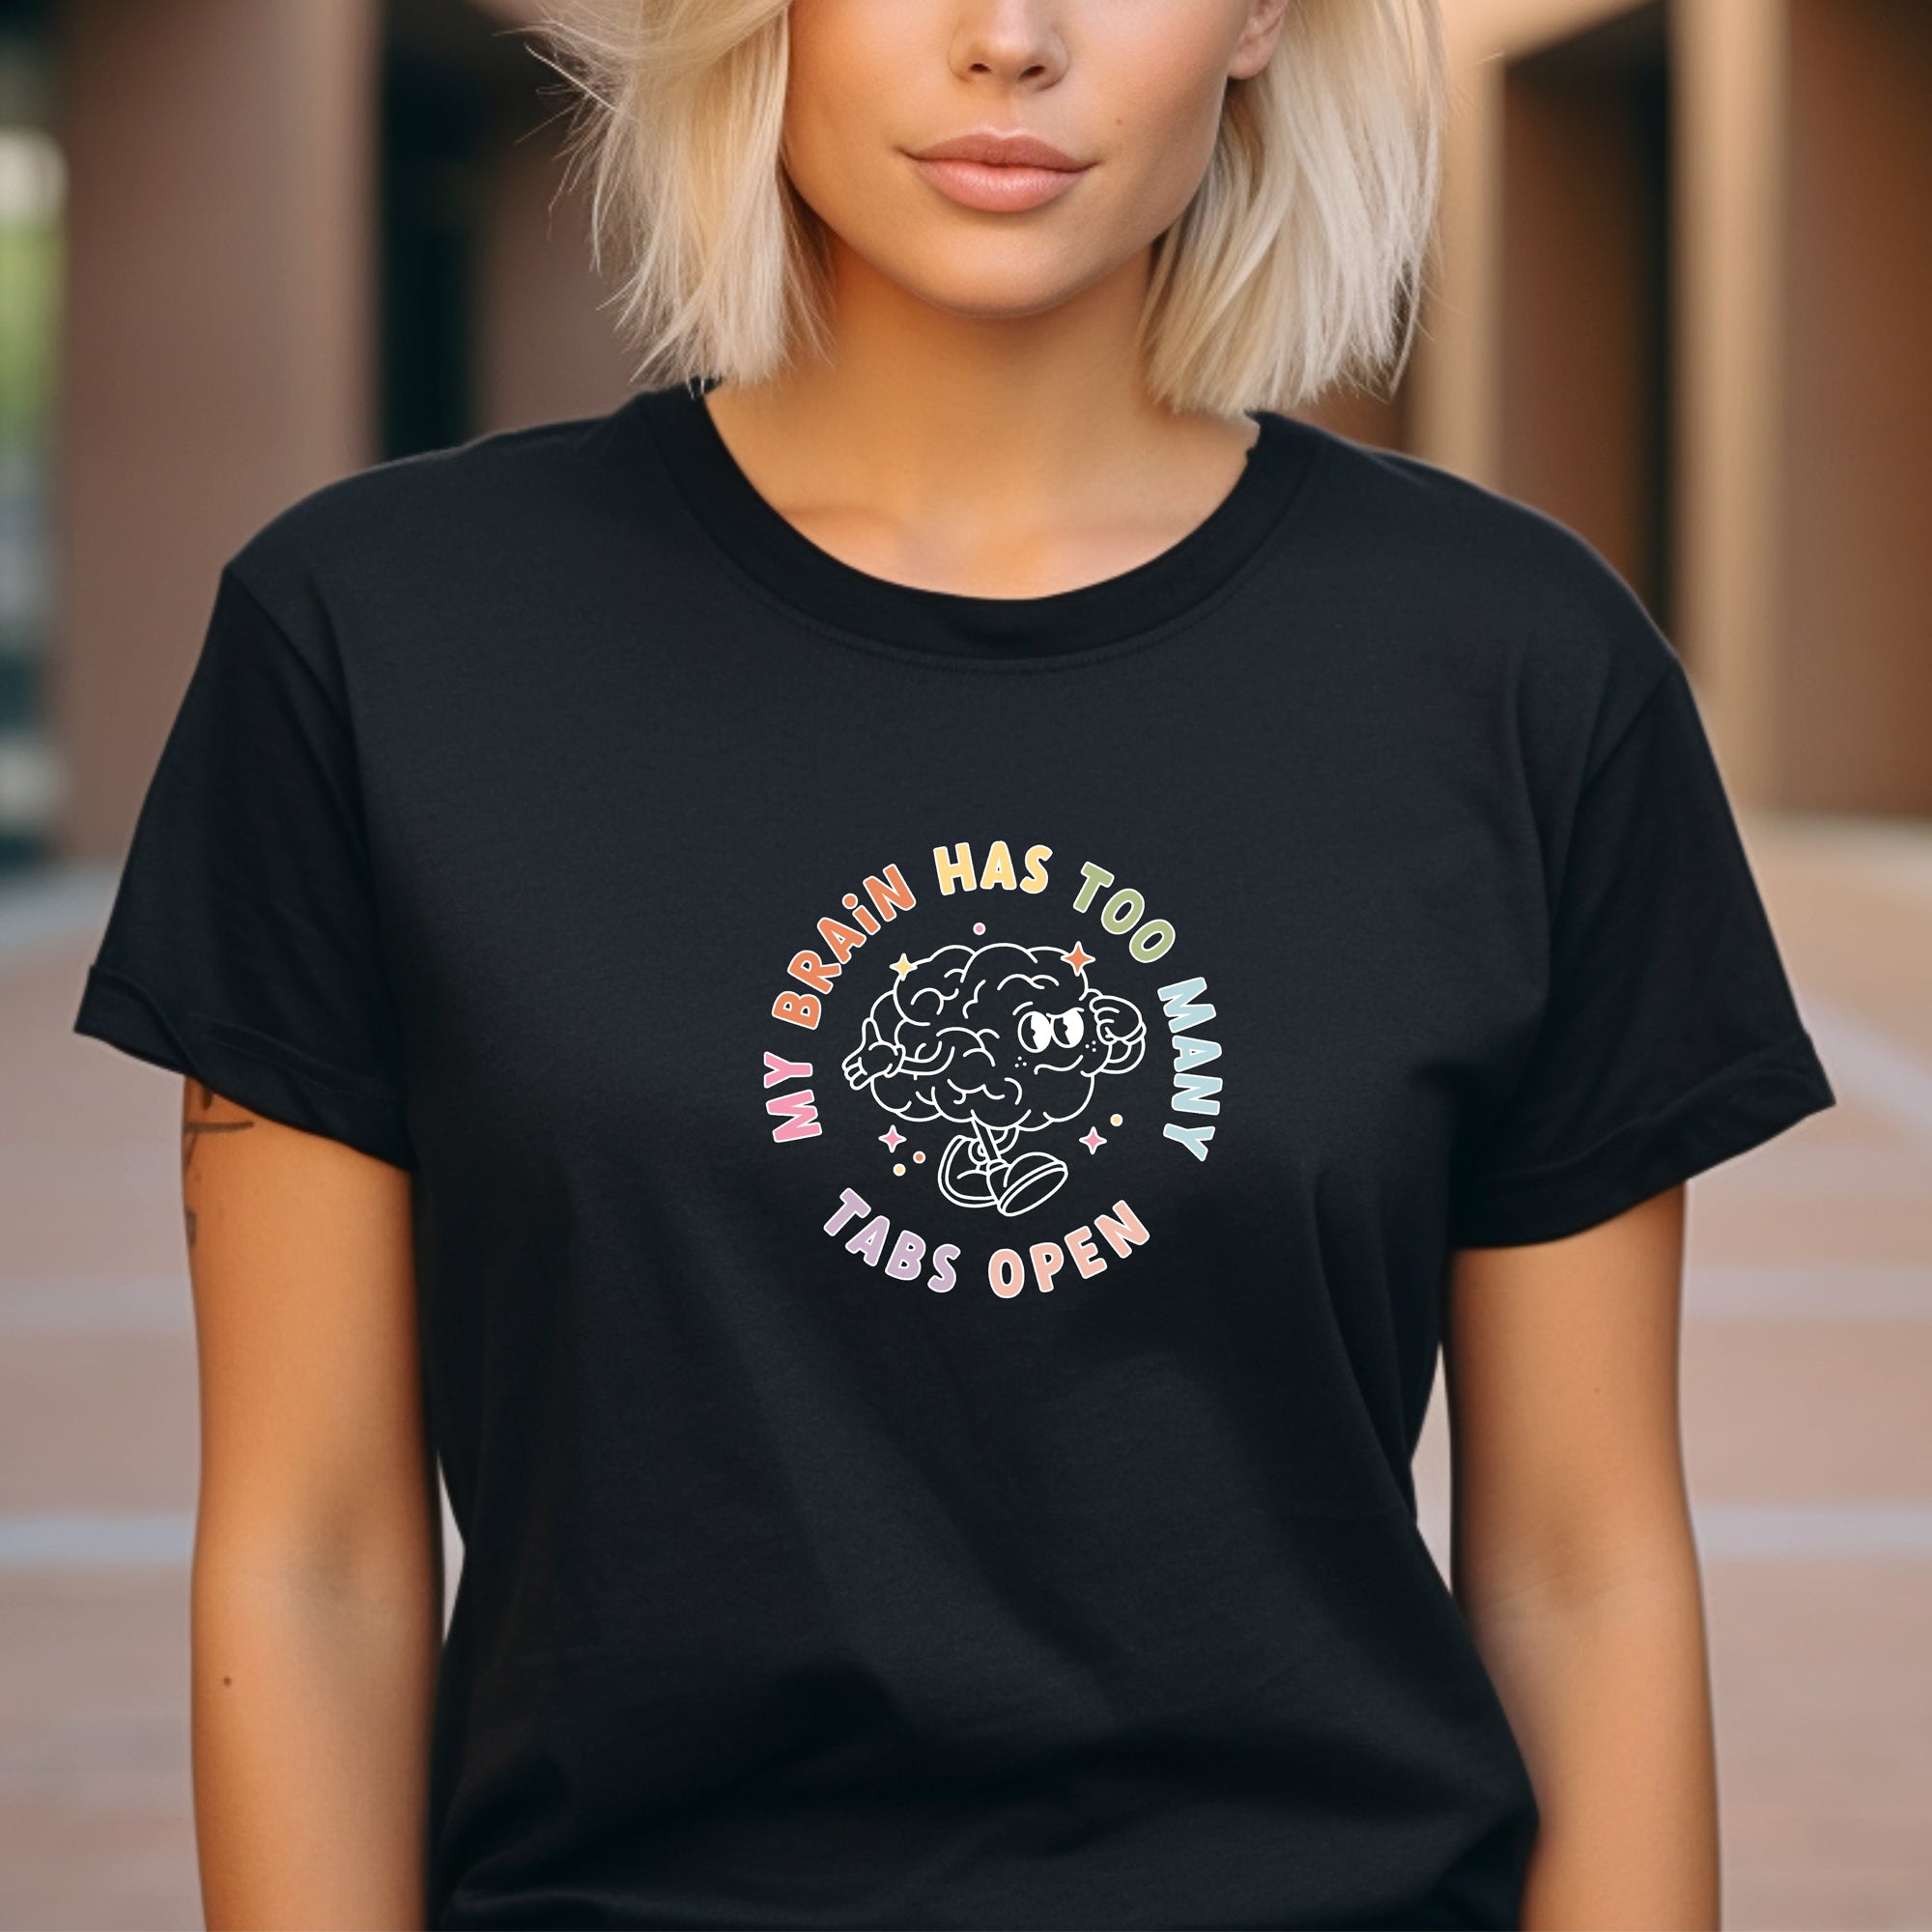 ADULT Unisex Too Many Tabs Open T-Shirt